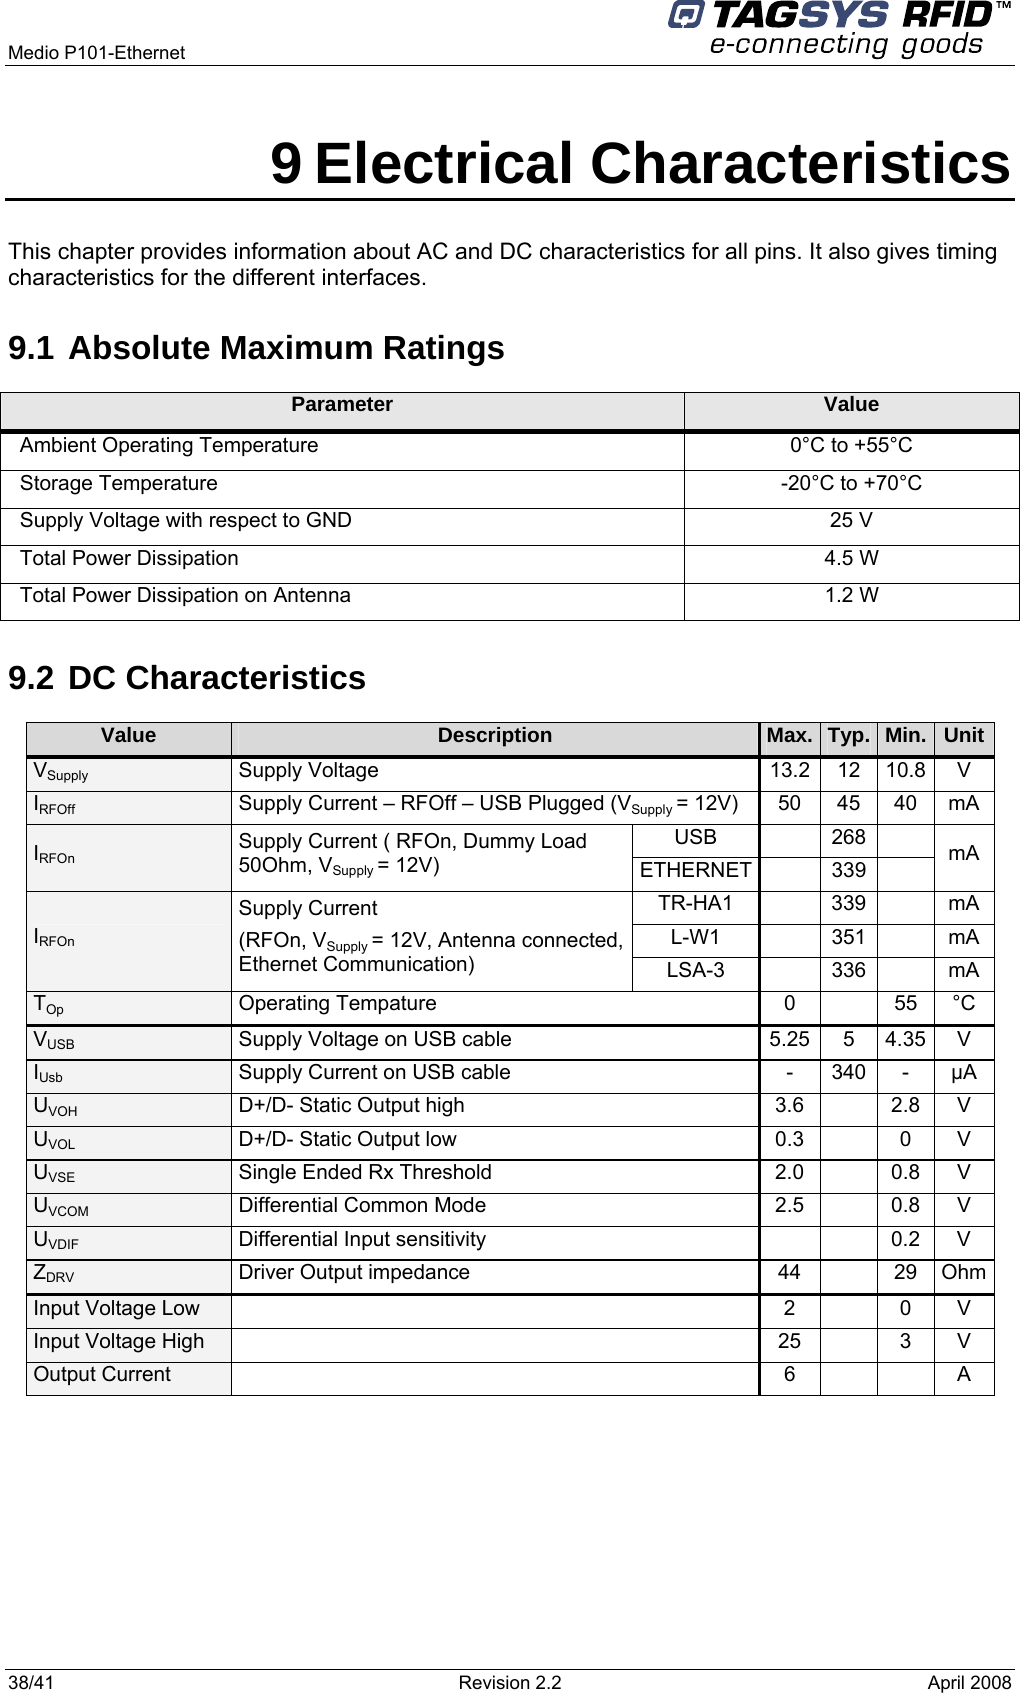   Medio P101-Ethernet 38/41  Revision 2.2  April 2008 9 Electrical Characteristics This chapter provides information about AC and DC characteristics for all pins. It also gives timing characteristics for the different interfaces. 9.1 Absolute Maximum Ratings Parameter  Value Ambient Operating Temperature   0°C to +55°C Storage Temperature  -20°C to +70°C Supply Voltage with respect to GND  25 V Total Power Dissipation   4.5 W Total Power Dissipation on Antenna  1.2 W  9.2 DC Characteristics Value  Description  Max.  Typ.  Min. UnitVSupply  Supply Voltage  13.2  12  10.8 V IRFOff  Supply Current – RFOff – USB Plugged (VSupply = 12V)  50  45  40  mA USB  268  IRFOn Supply Current ( RFOn, Dummy Load 50Ohm, VSupply = 12V)  ETHERNET  339  mA TR-HA1     339    mA L-W1  351  mA IRFOn Supply Current  (RFOn, VSupply = 12V, Antenna connected, Ethernet Communication)  LSA-3  336  mA TOp  Operating Tempature  0    55  °C VUSB  Supply Voltage on USB cable  5.25  5  4.35 V IUsb  Supply Current on USB cable  -  340  -  µA UVOH  D+/D- Static Output high  3.6    2.8  V UVOL  D+/D- Static Output low  0.3    0  V UVSE  Single Ended Rx Threshold  2.0    0.8  V UVCOM  Differential Common Mode  2.5    0.8  V UVDIF  Differential Input sensitivity      0.2  V ZDRV  Driver Output impedance  44    29  OhmInput Voltage Low    2    0  V Input Voltage High  25  3 V Output Current  6   A   